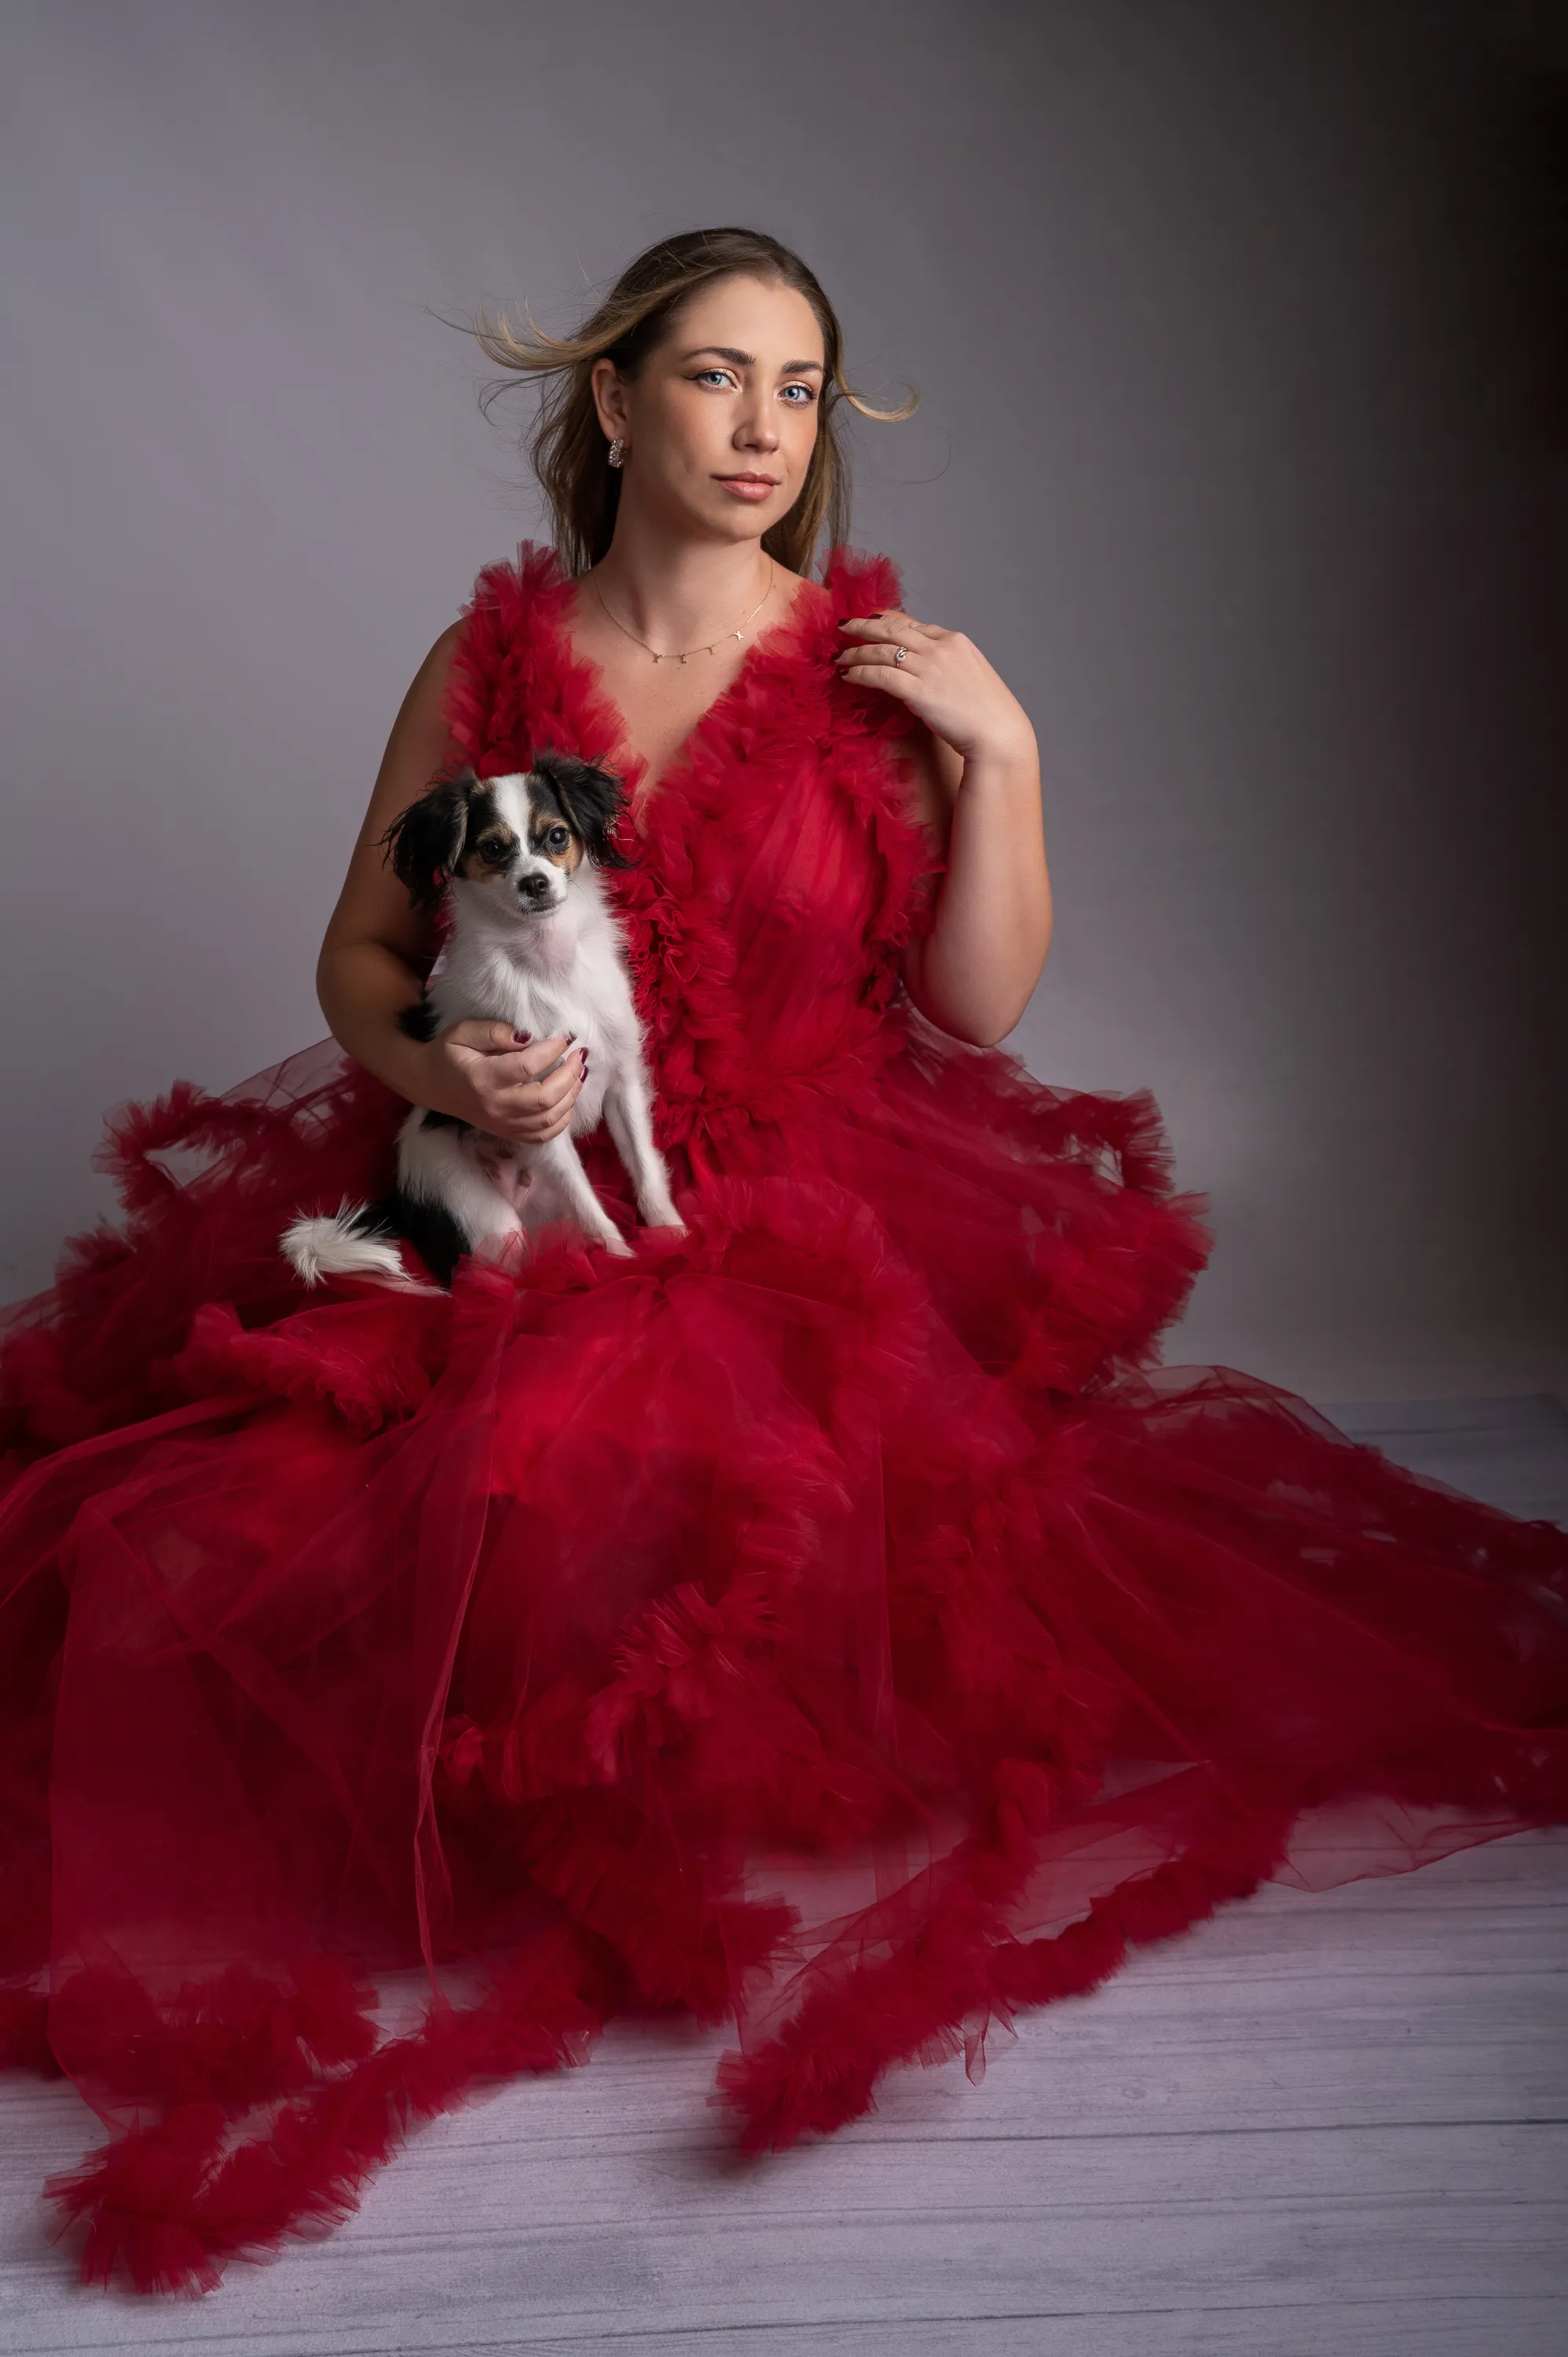 Woman in red dress with small dog 3